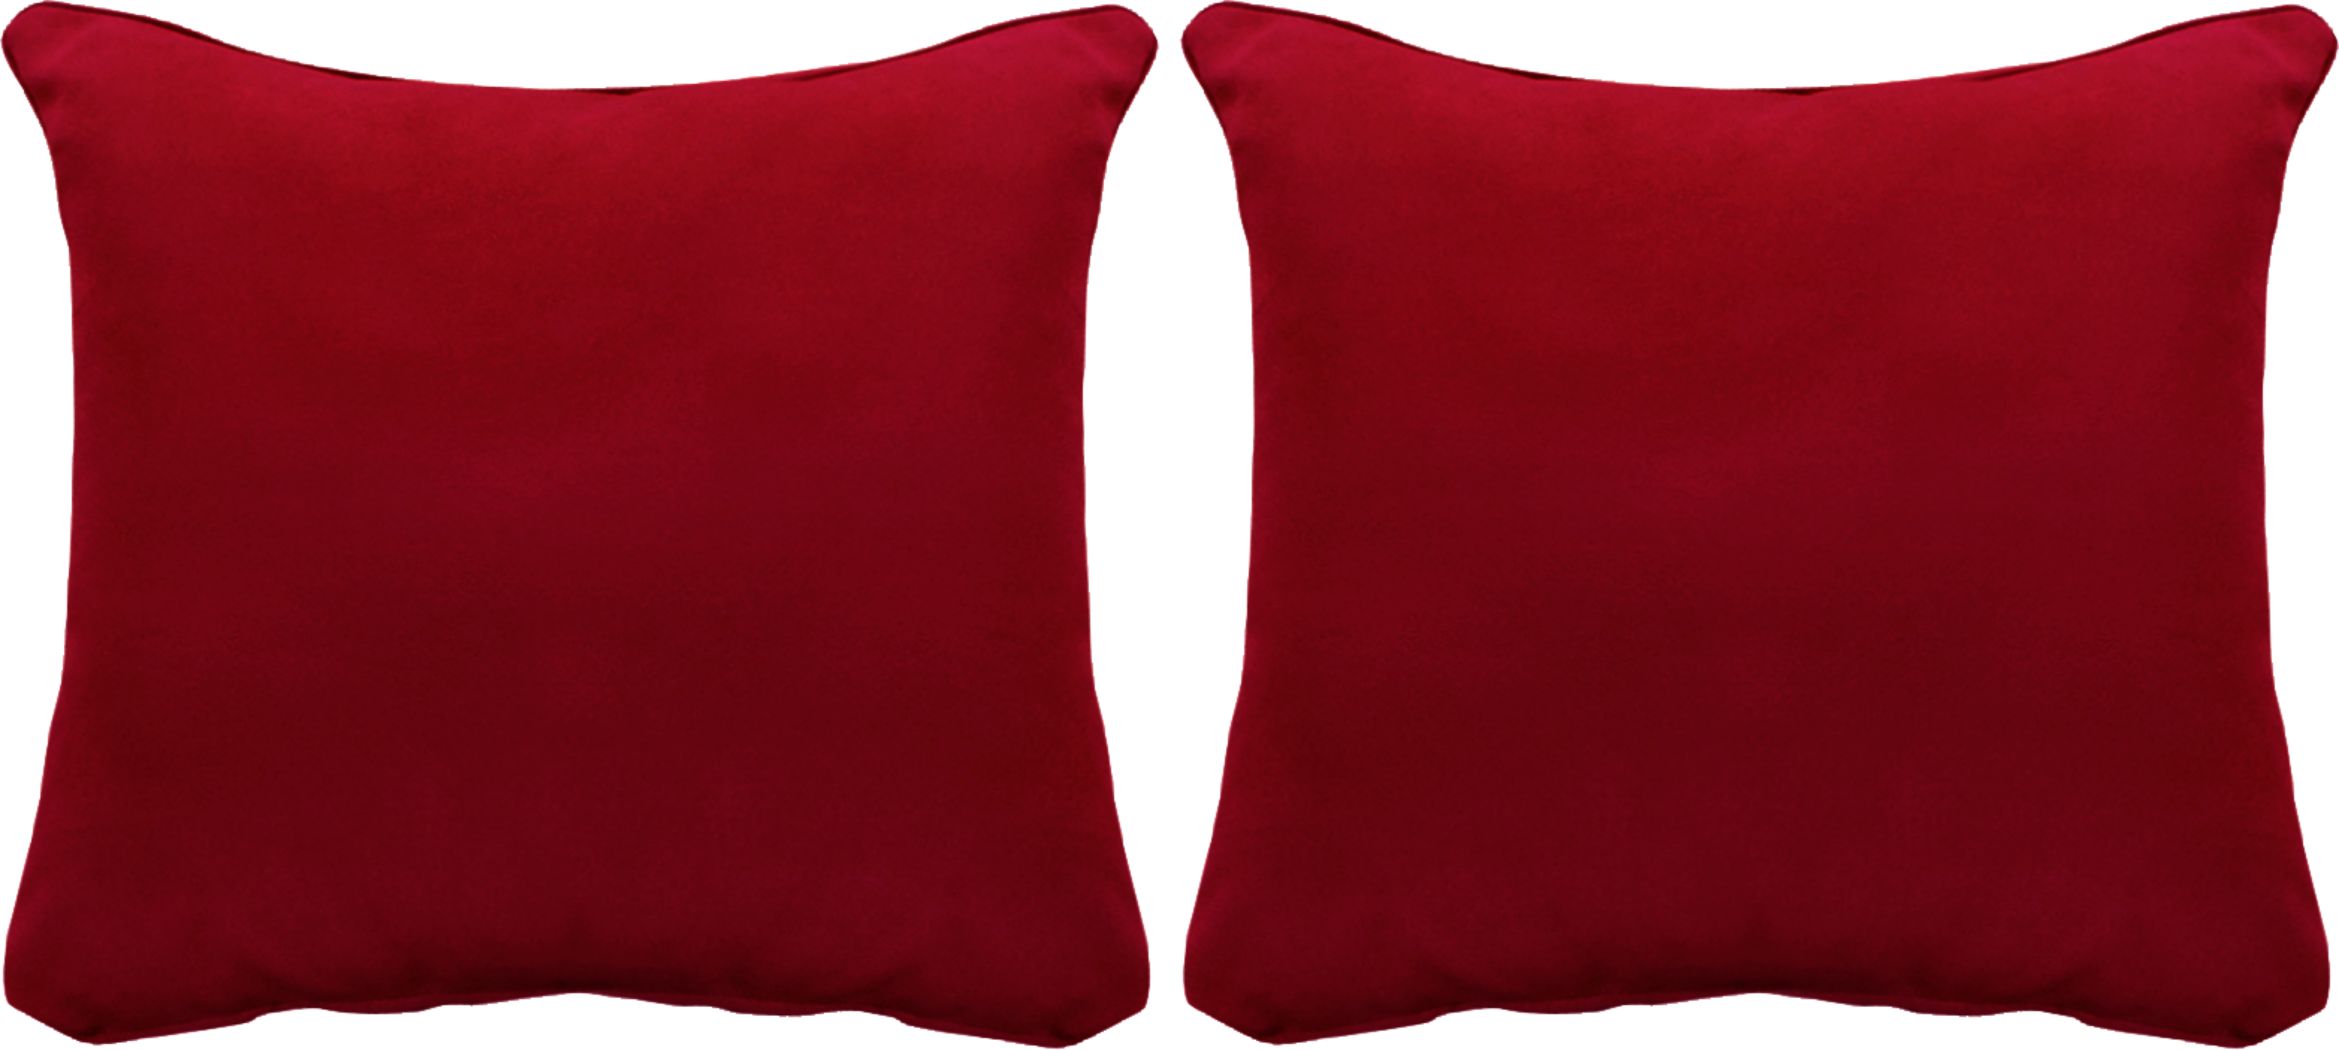 red fuzzy pillows